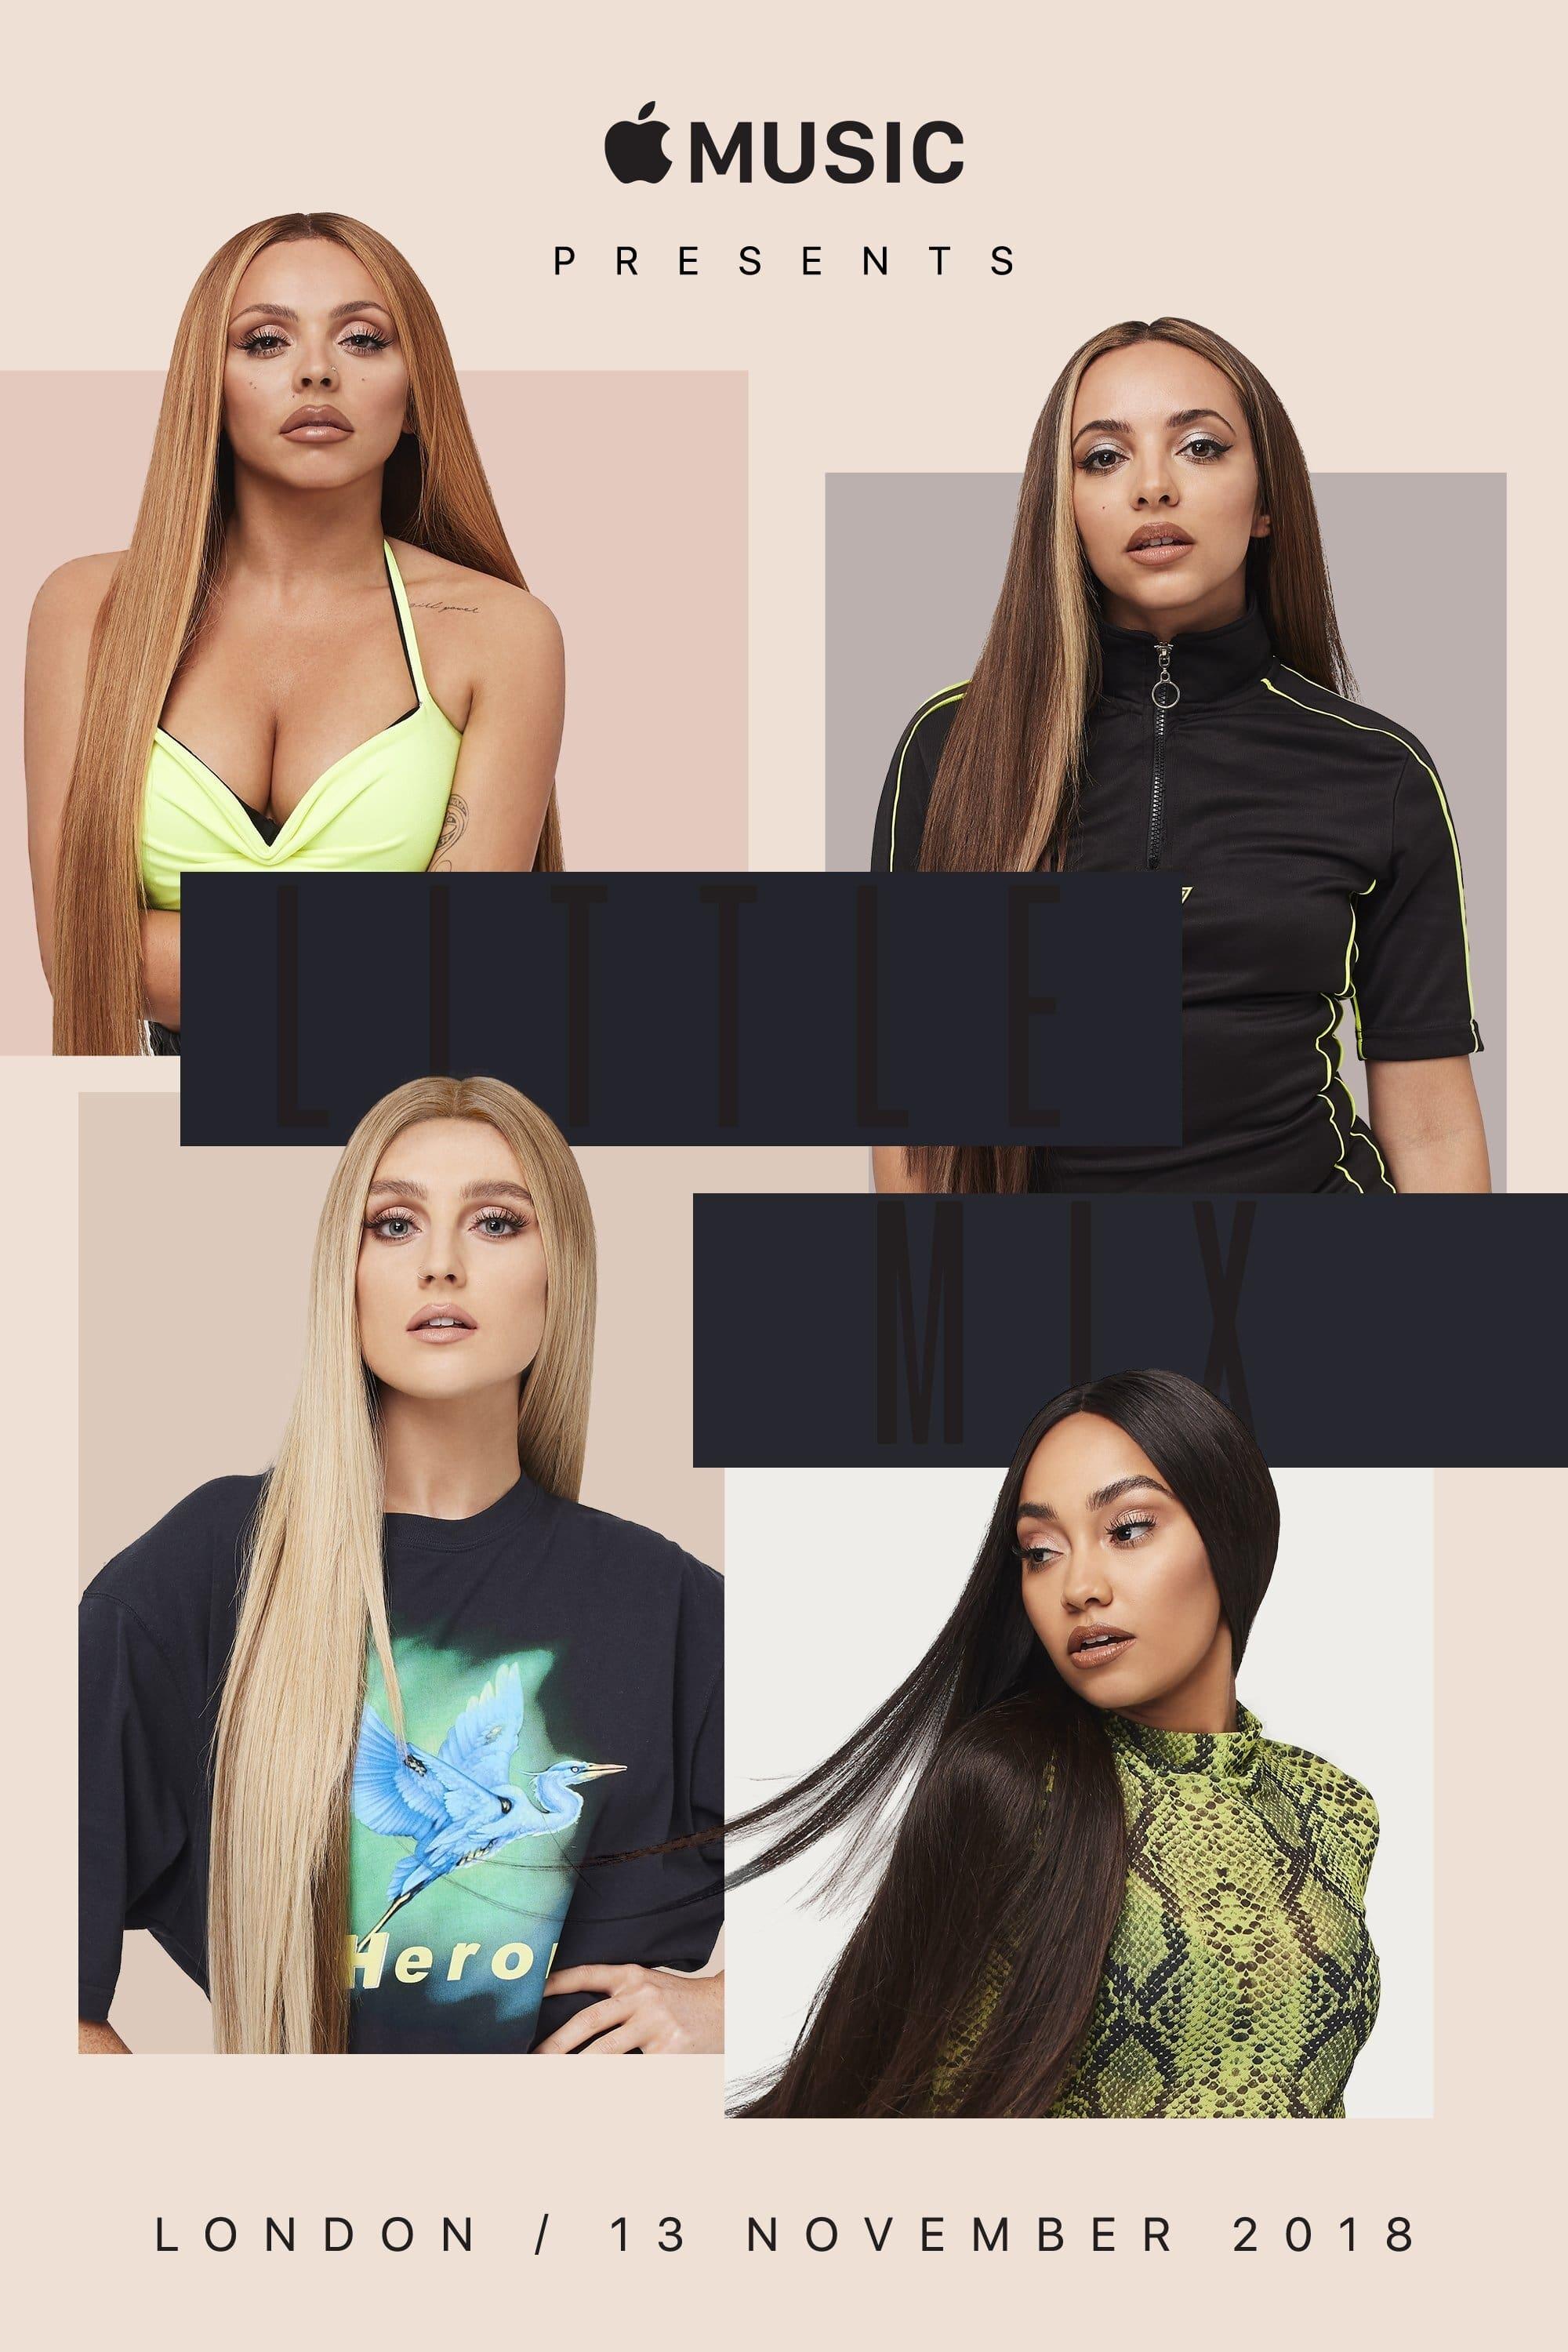 Apple Music Presents: Little Mix - Live from London poster